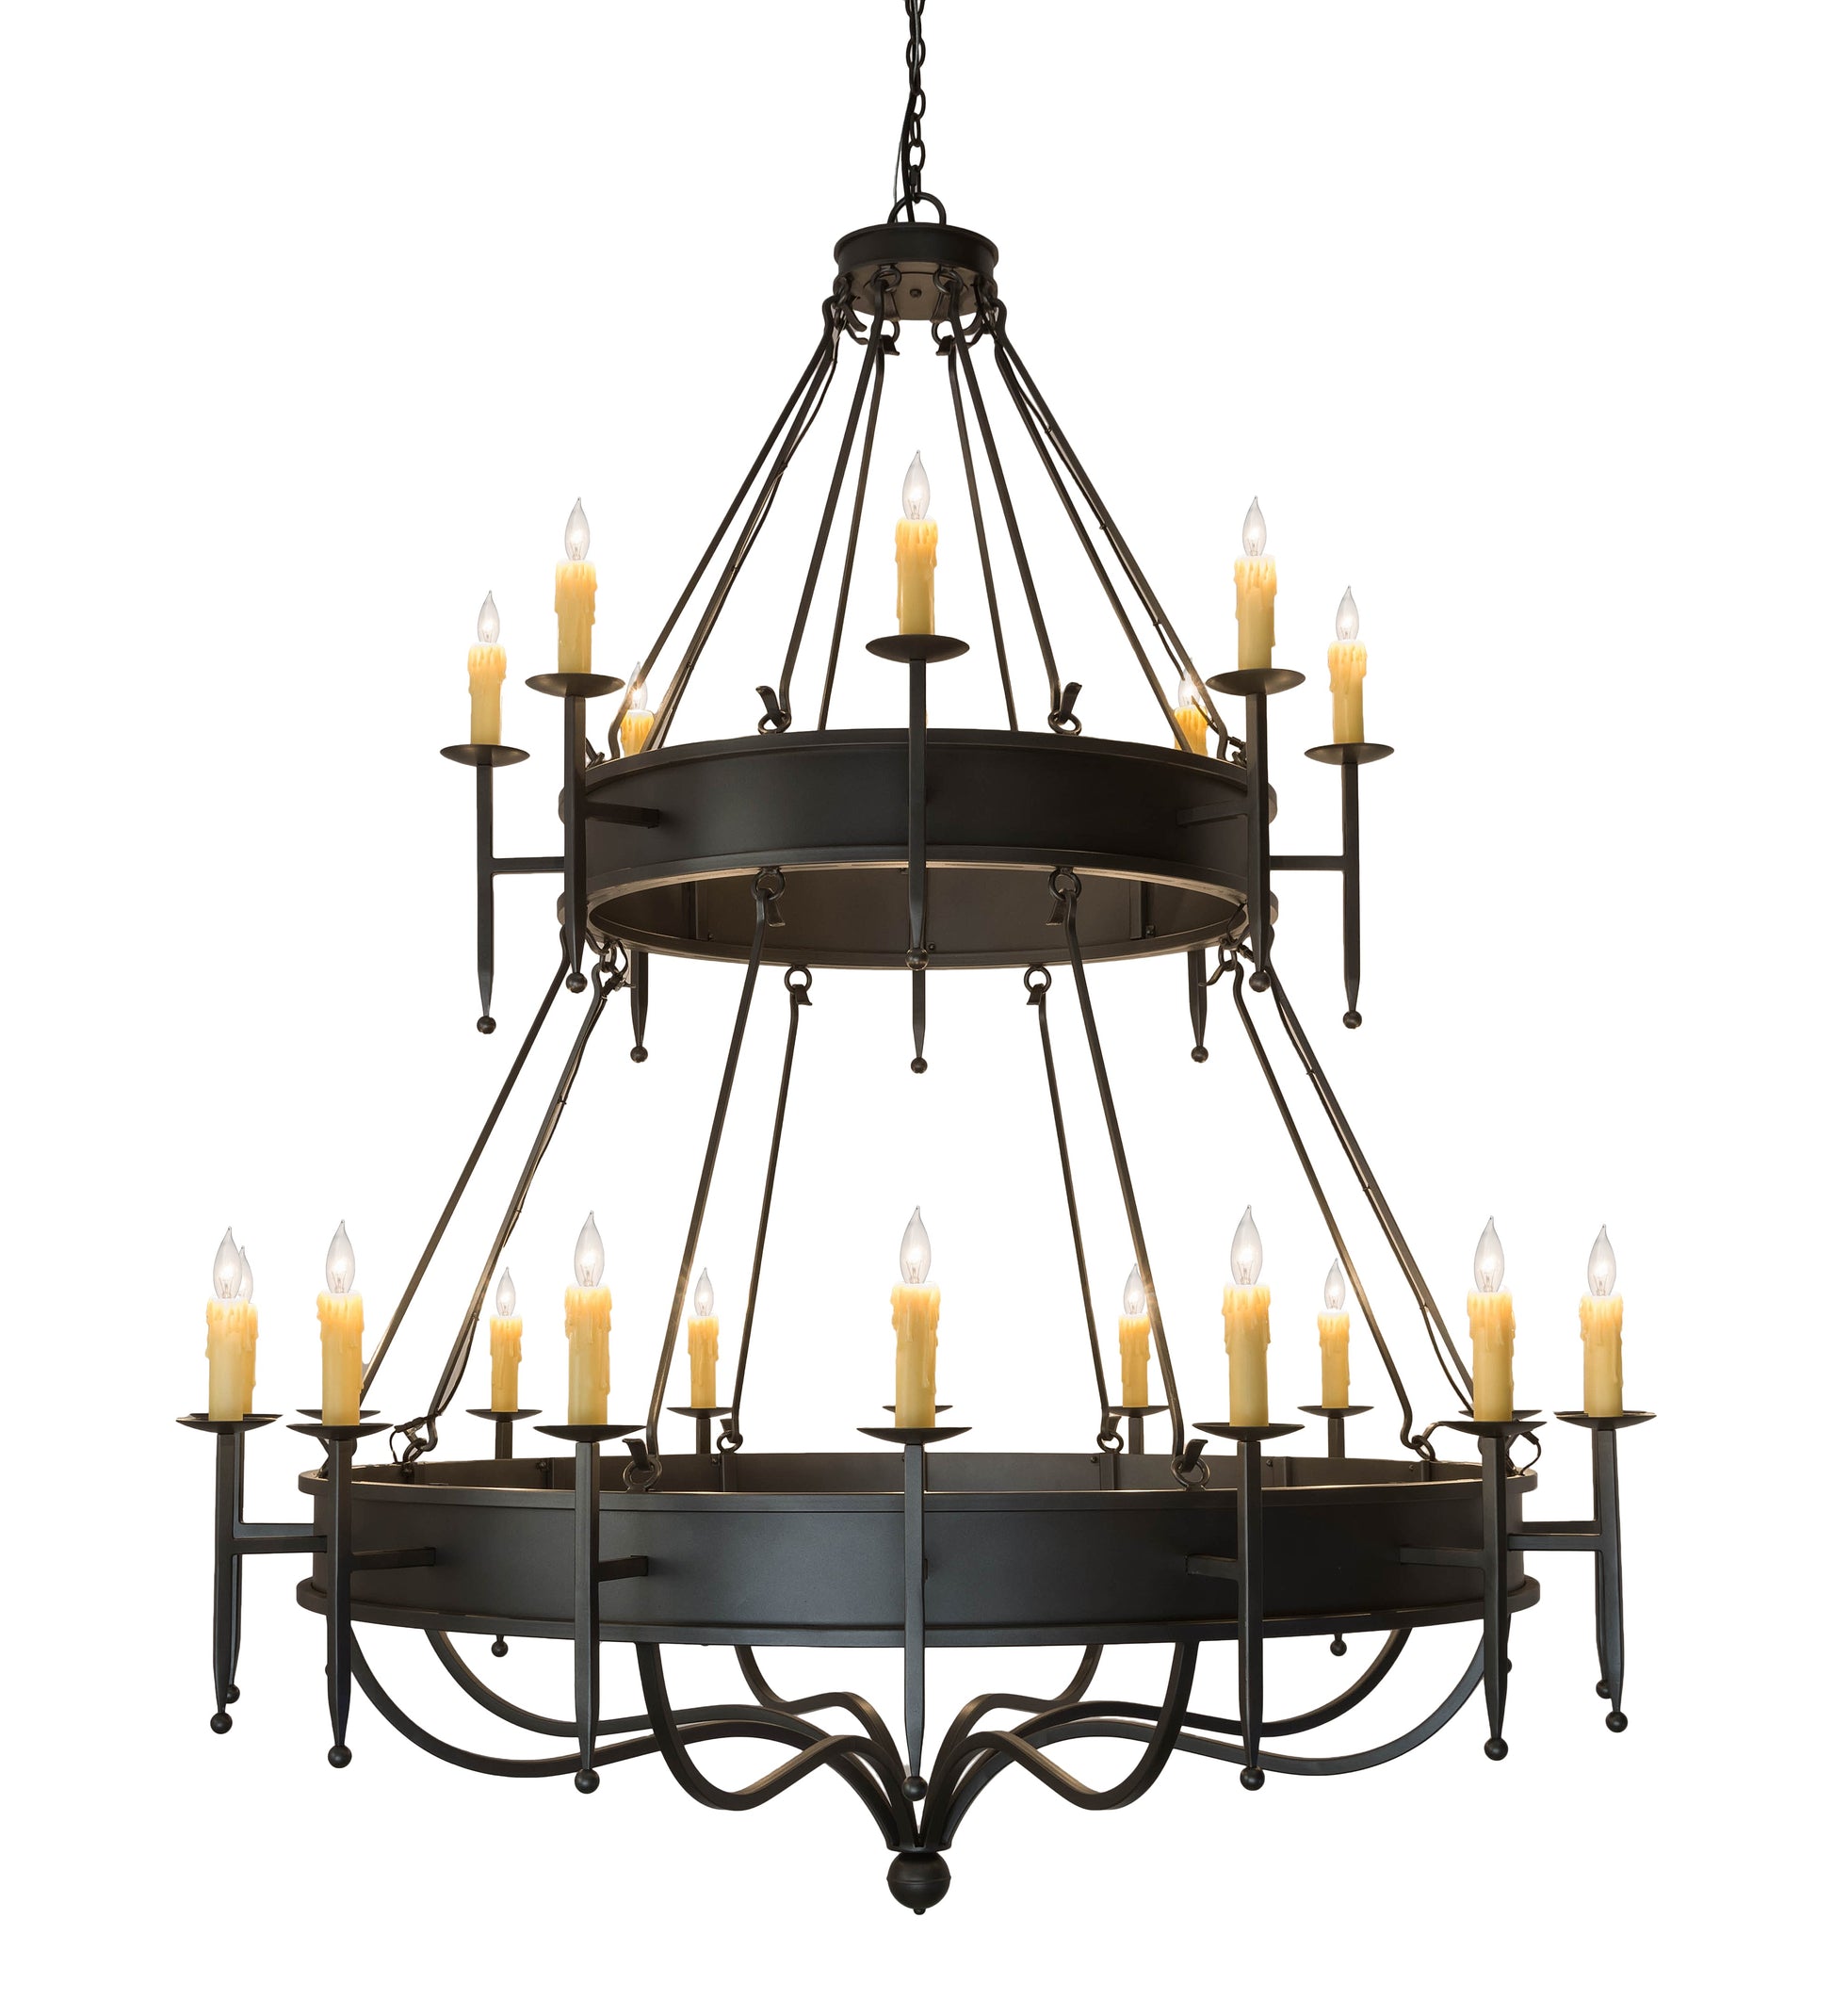 72" Marta 24-Light Two Tier Chandelier by 2nd Ave Lighting